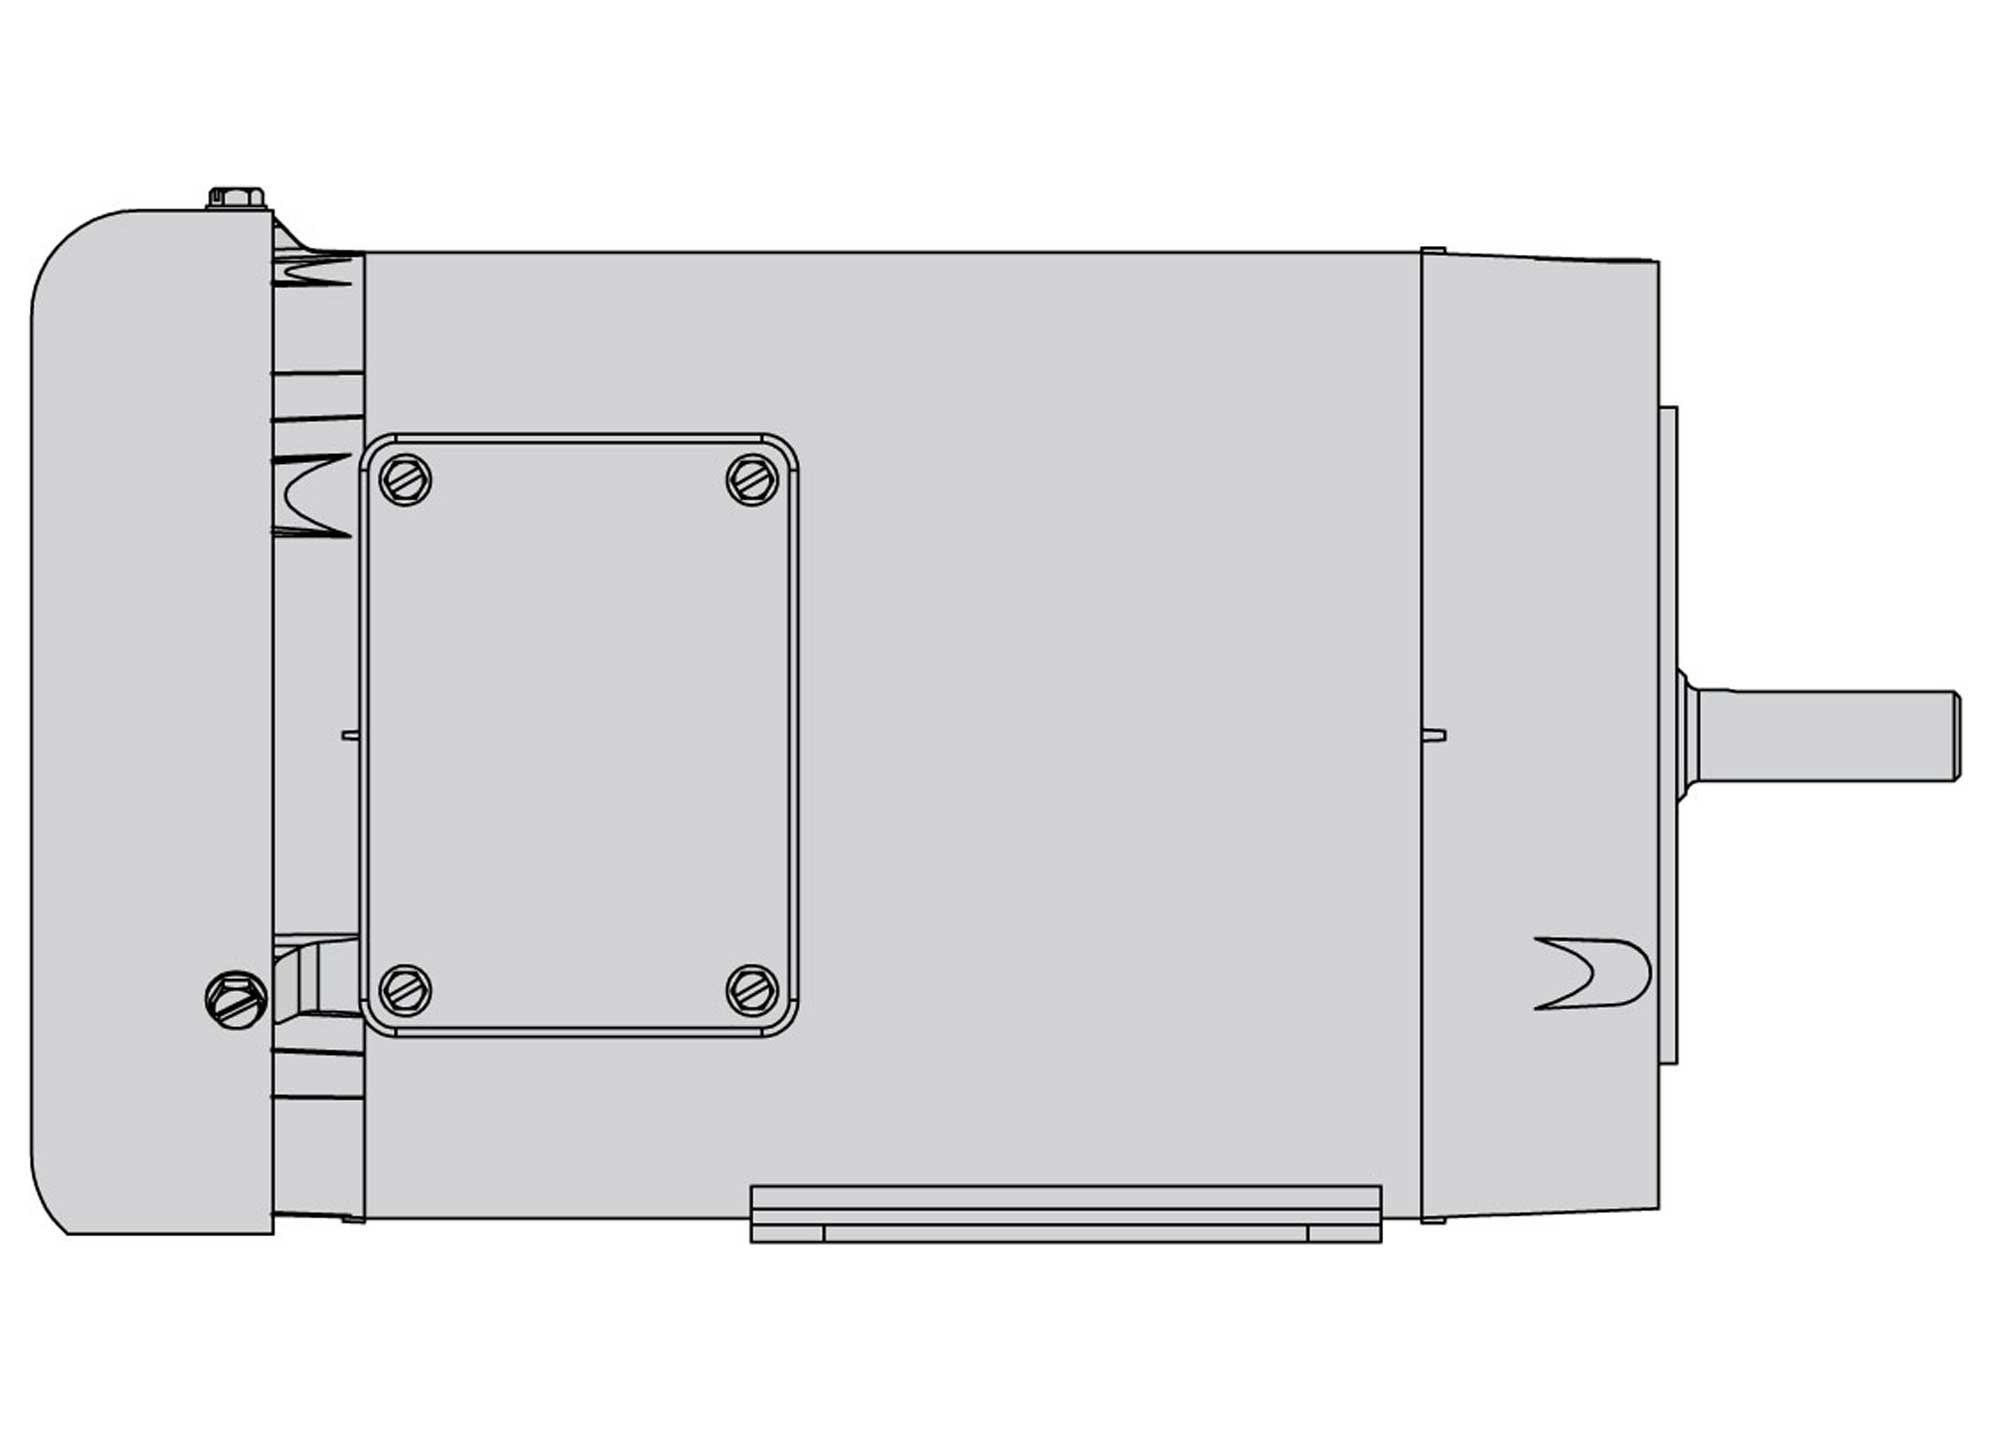 c-face motor line drawing